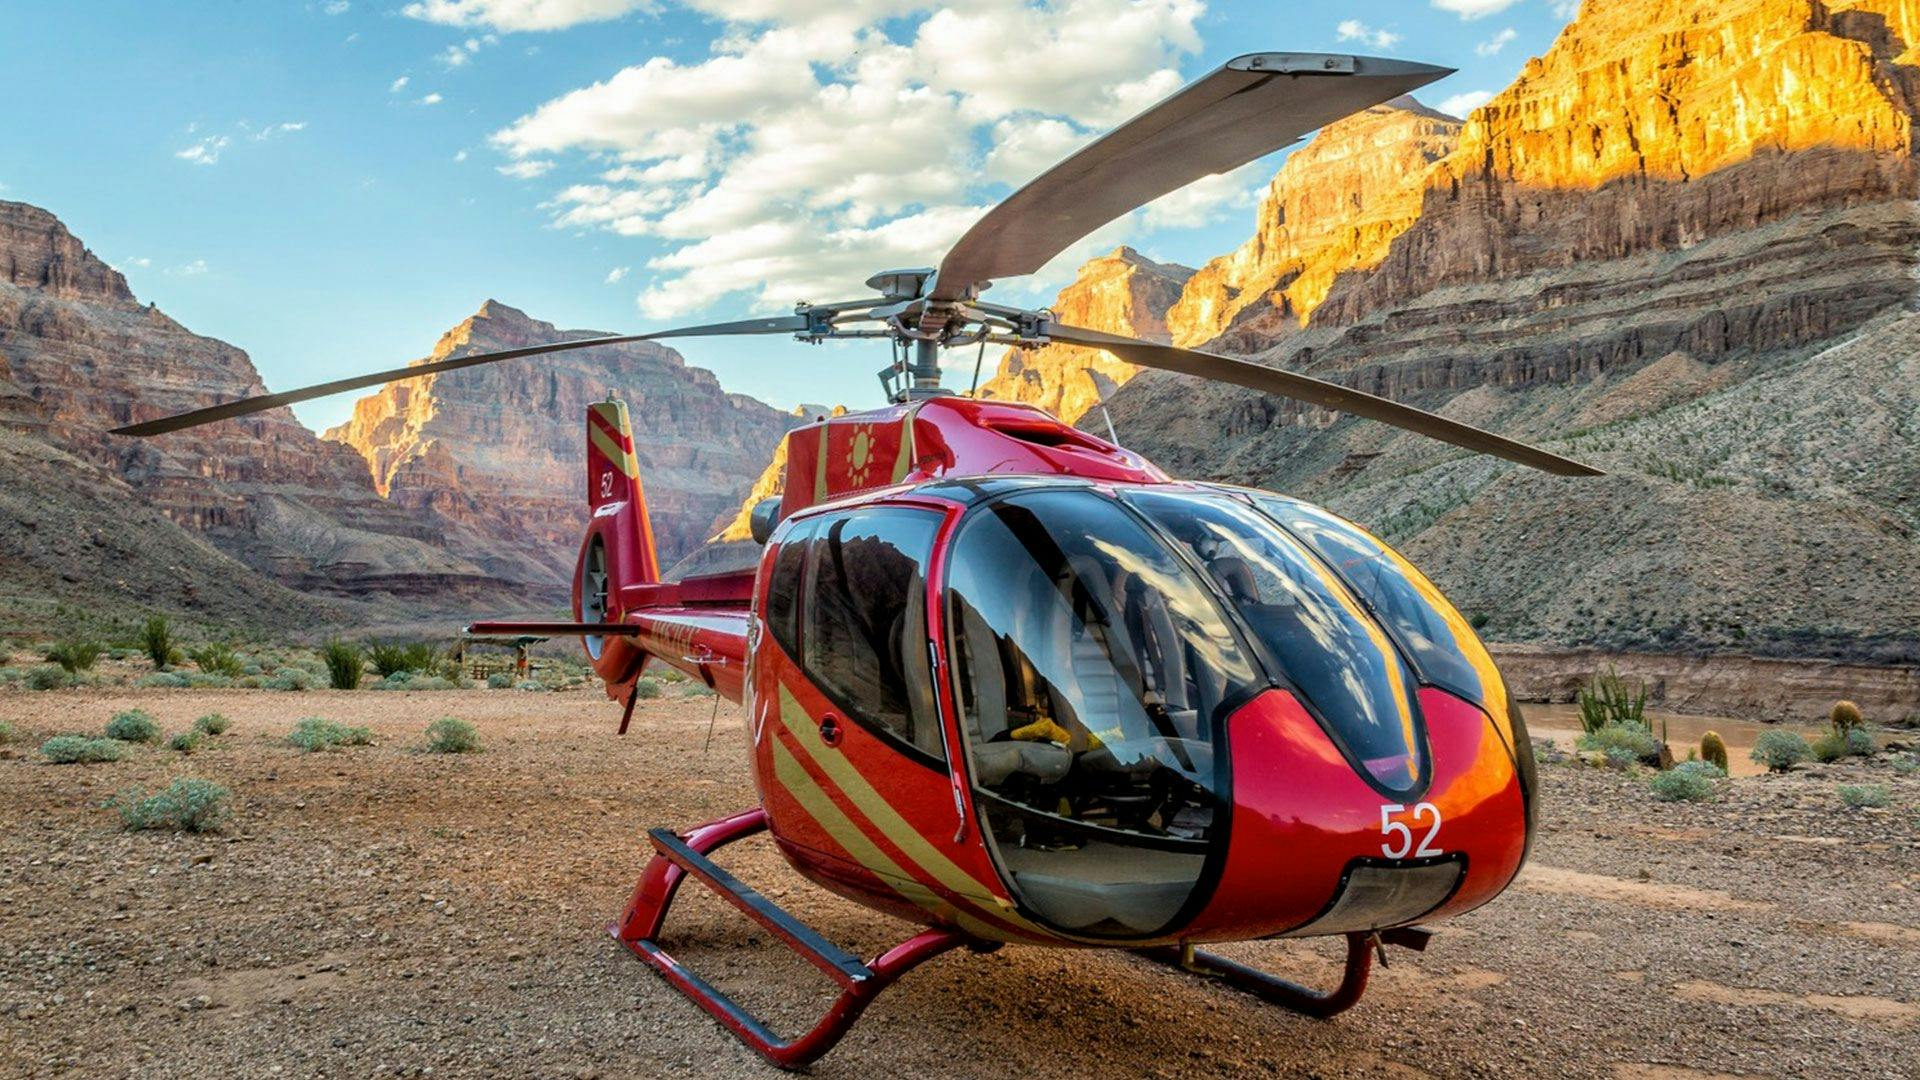 Helicopter tour to the Grand Canyon with boat ride and Skywalk Musement